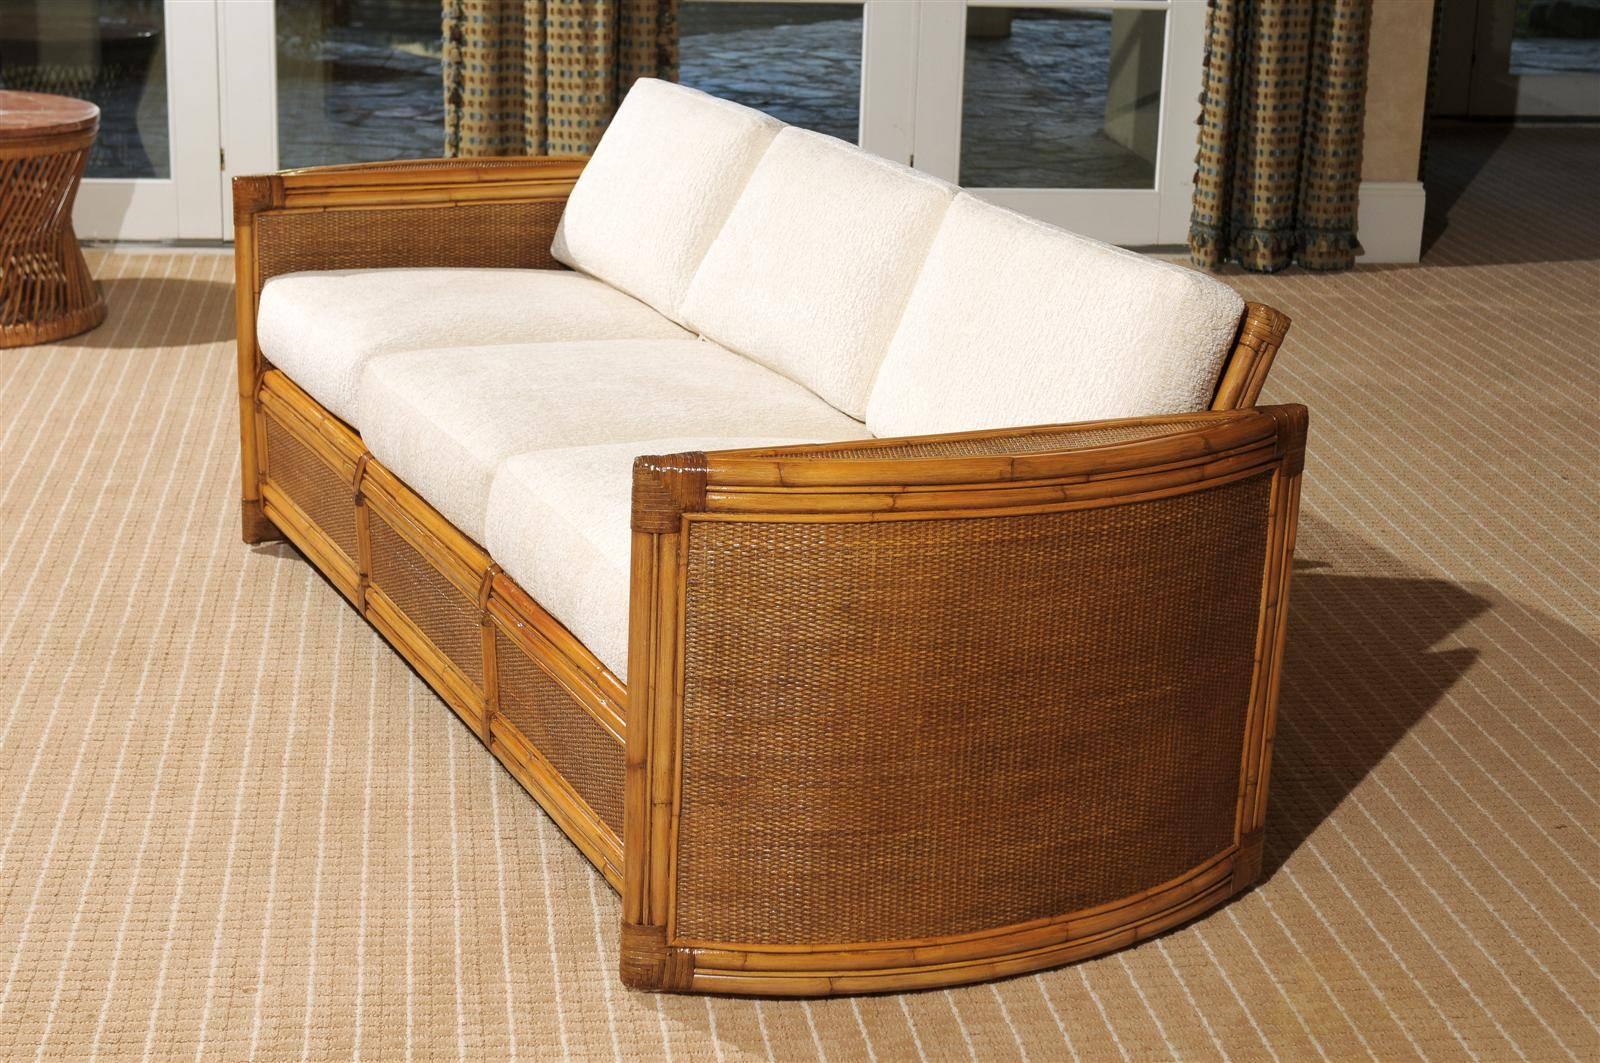 Late 20th Century Exceptional Restored Vintage Rattan Sofa